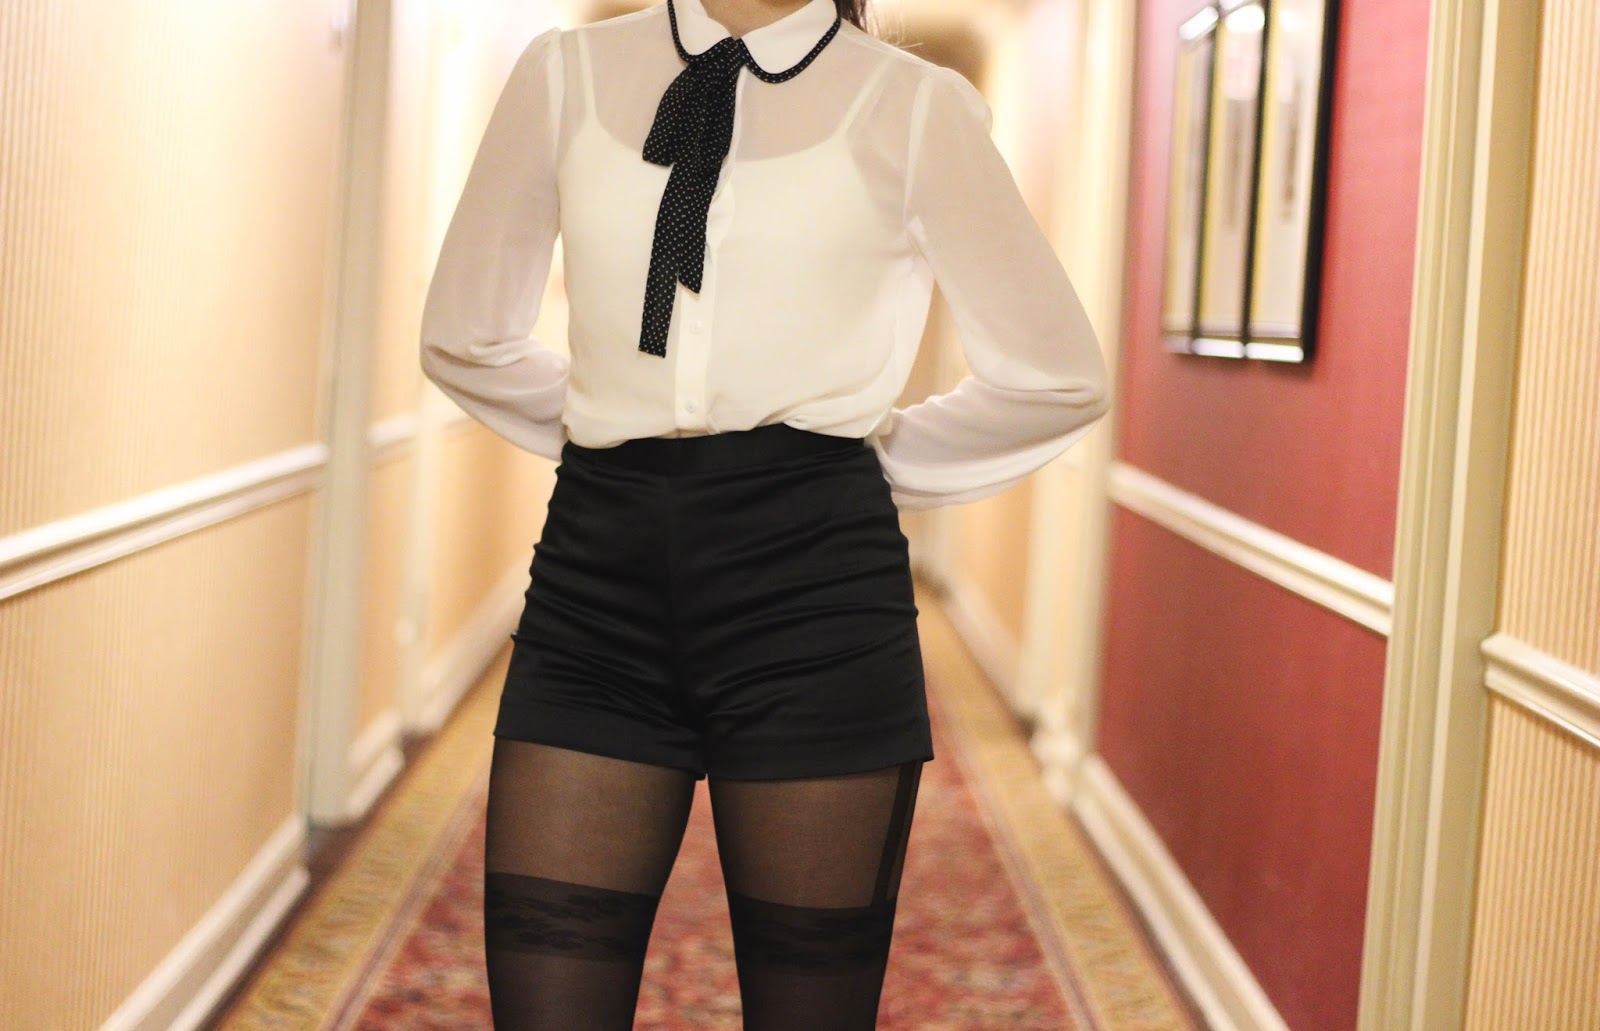 Retro 60s Inspired Style, Peter Pan Collar Top, Black High Waist Shorts, Taylor Swift Style